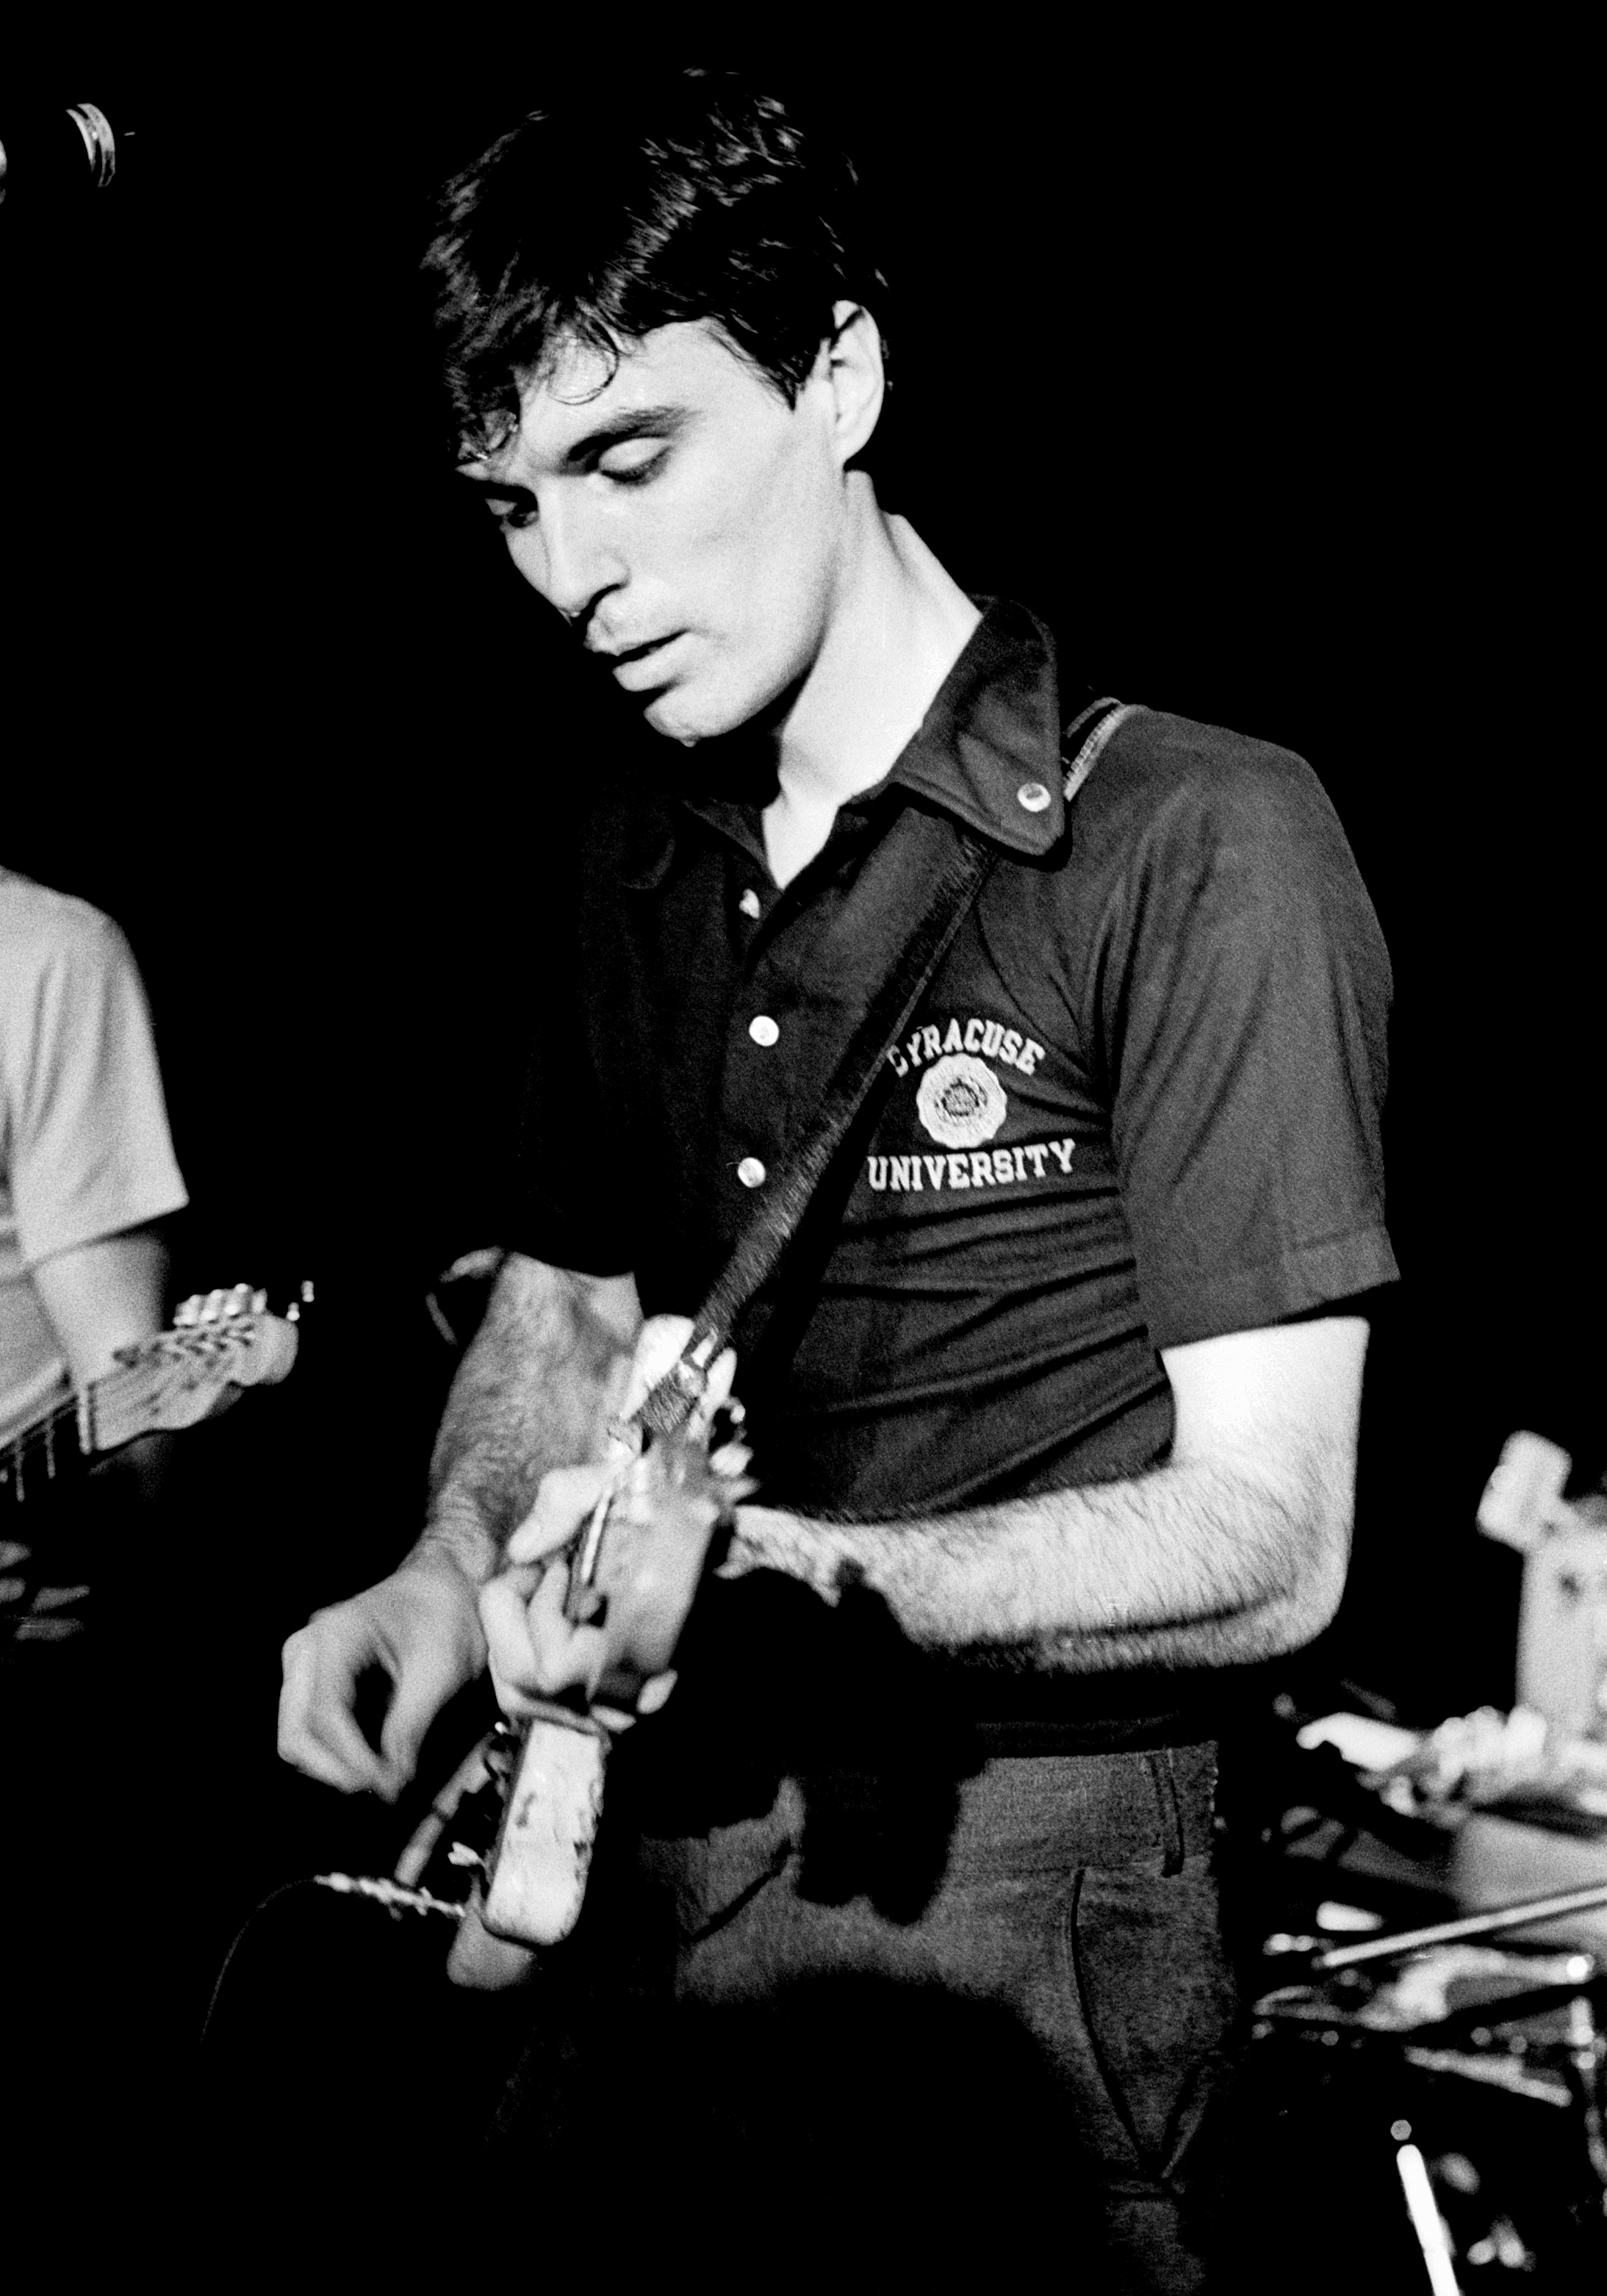 David Byrne performing with the Talking Heads in 1977